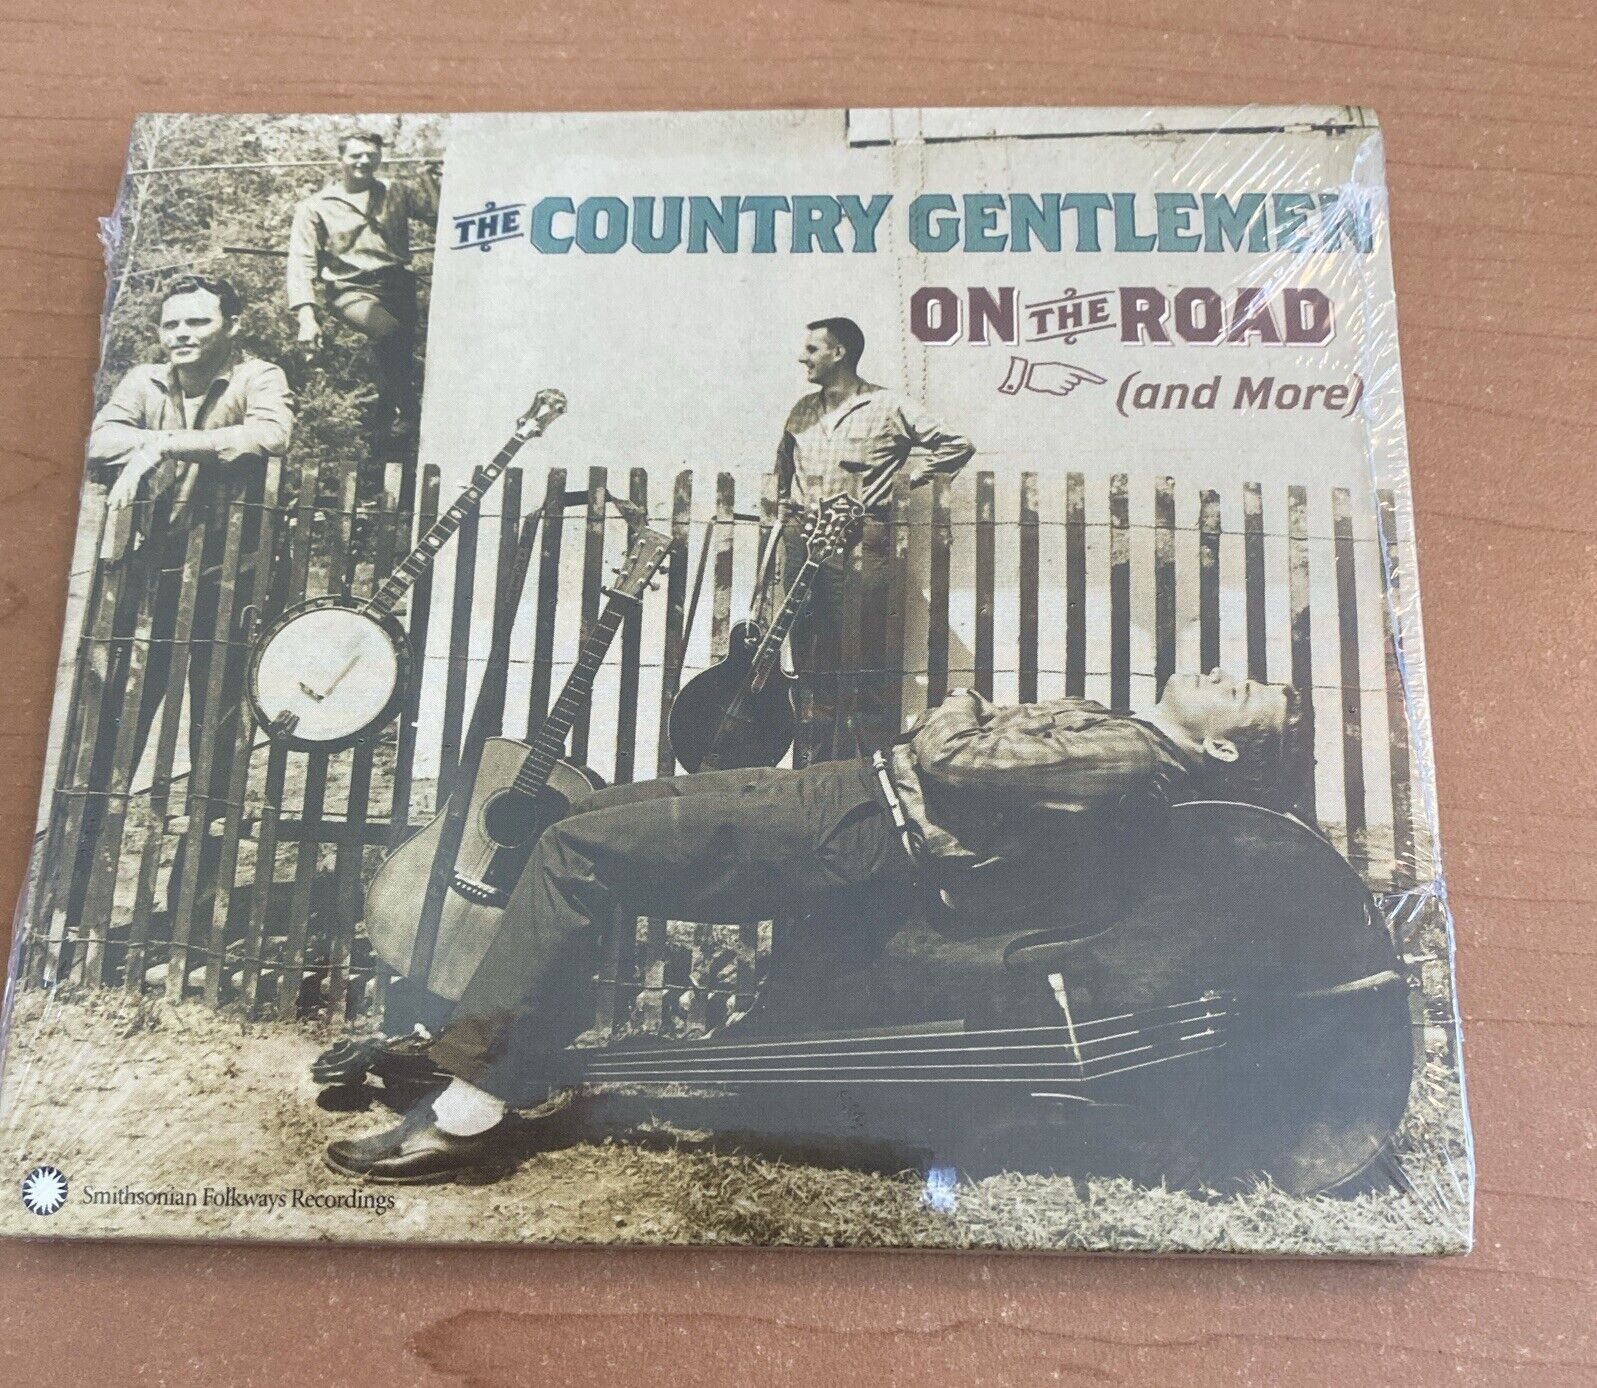 On the Road by The Country Gentlemen (CD, Apr-2001, Smithsonian Folkways...